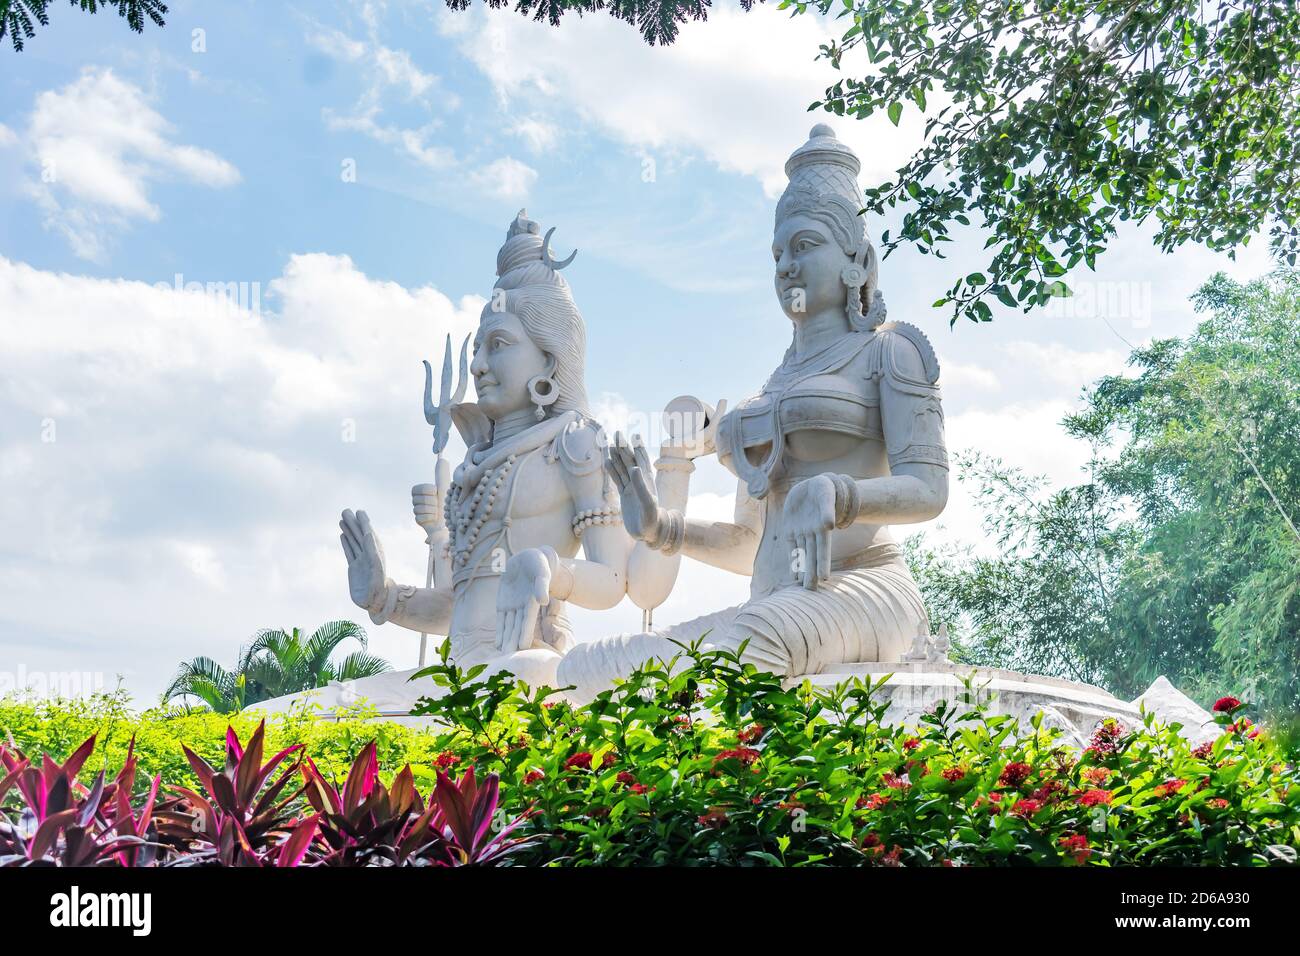 lord shiv & parvati statue at an indian garden looking awesome with small shrubs. Stock Photo